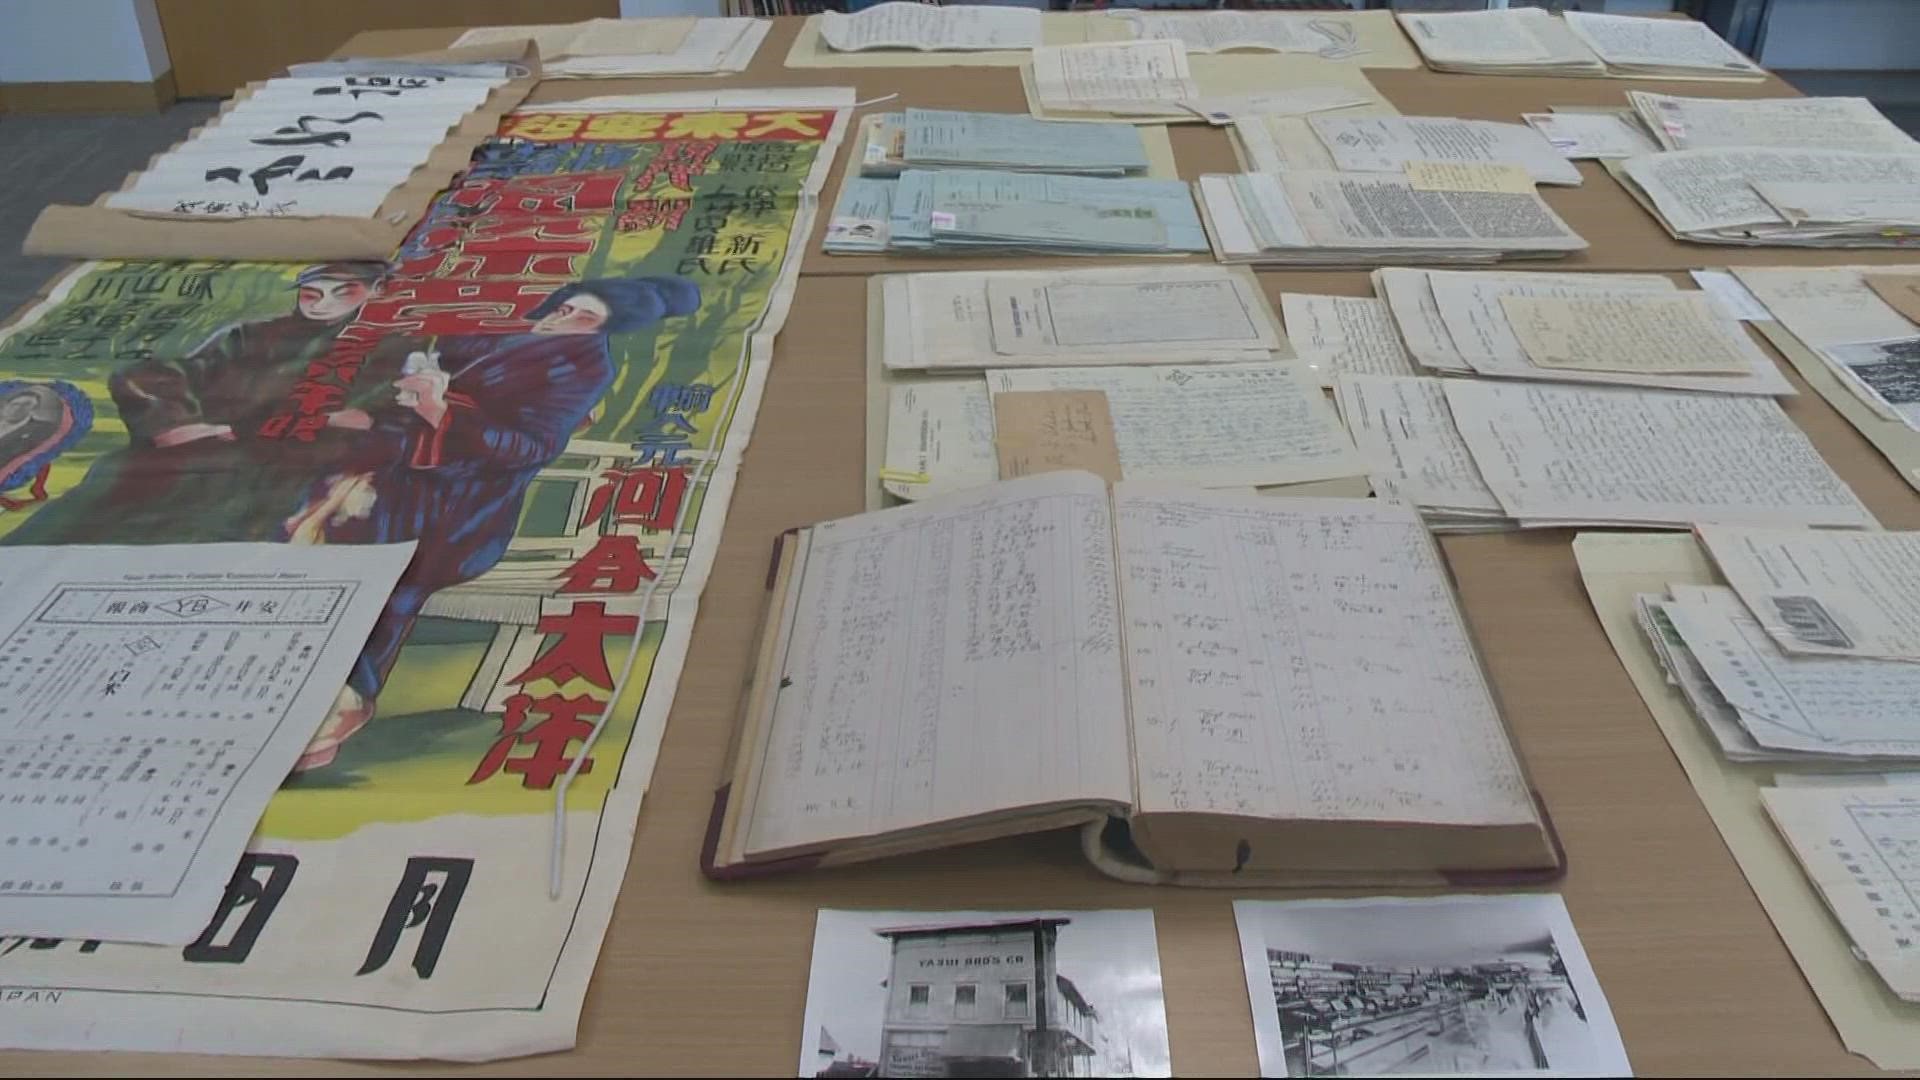 A grant will fund the Oregon Historical Society’s work on a collection from the prominent Yasui family, helping to share their powerful story.